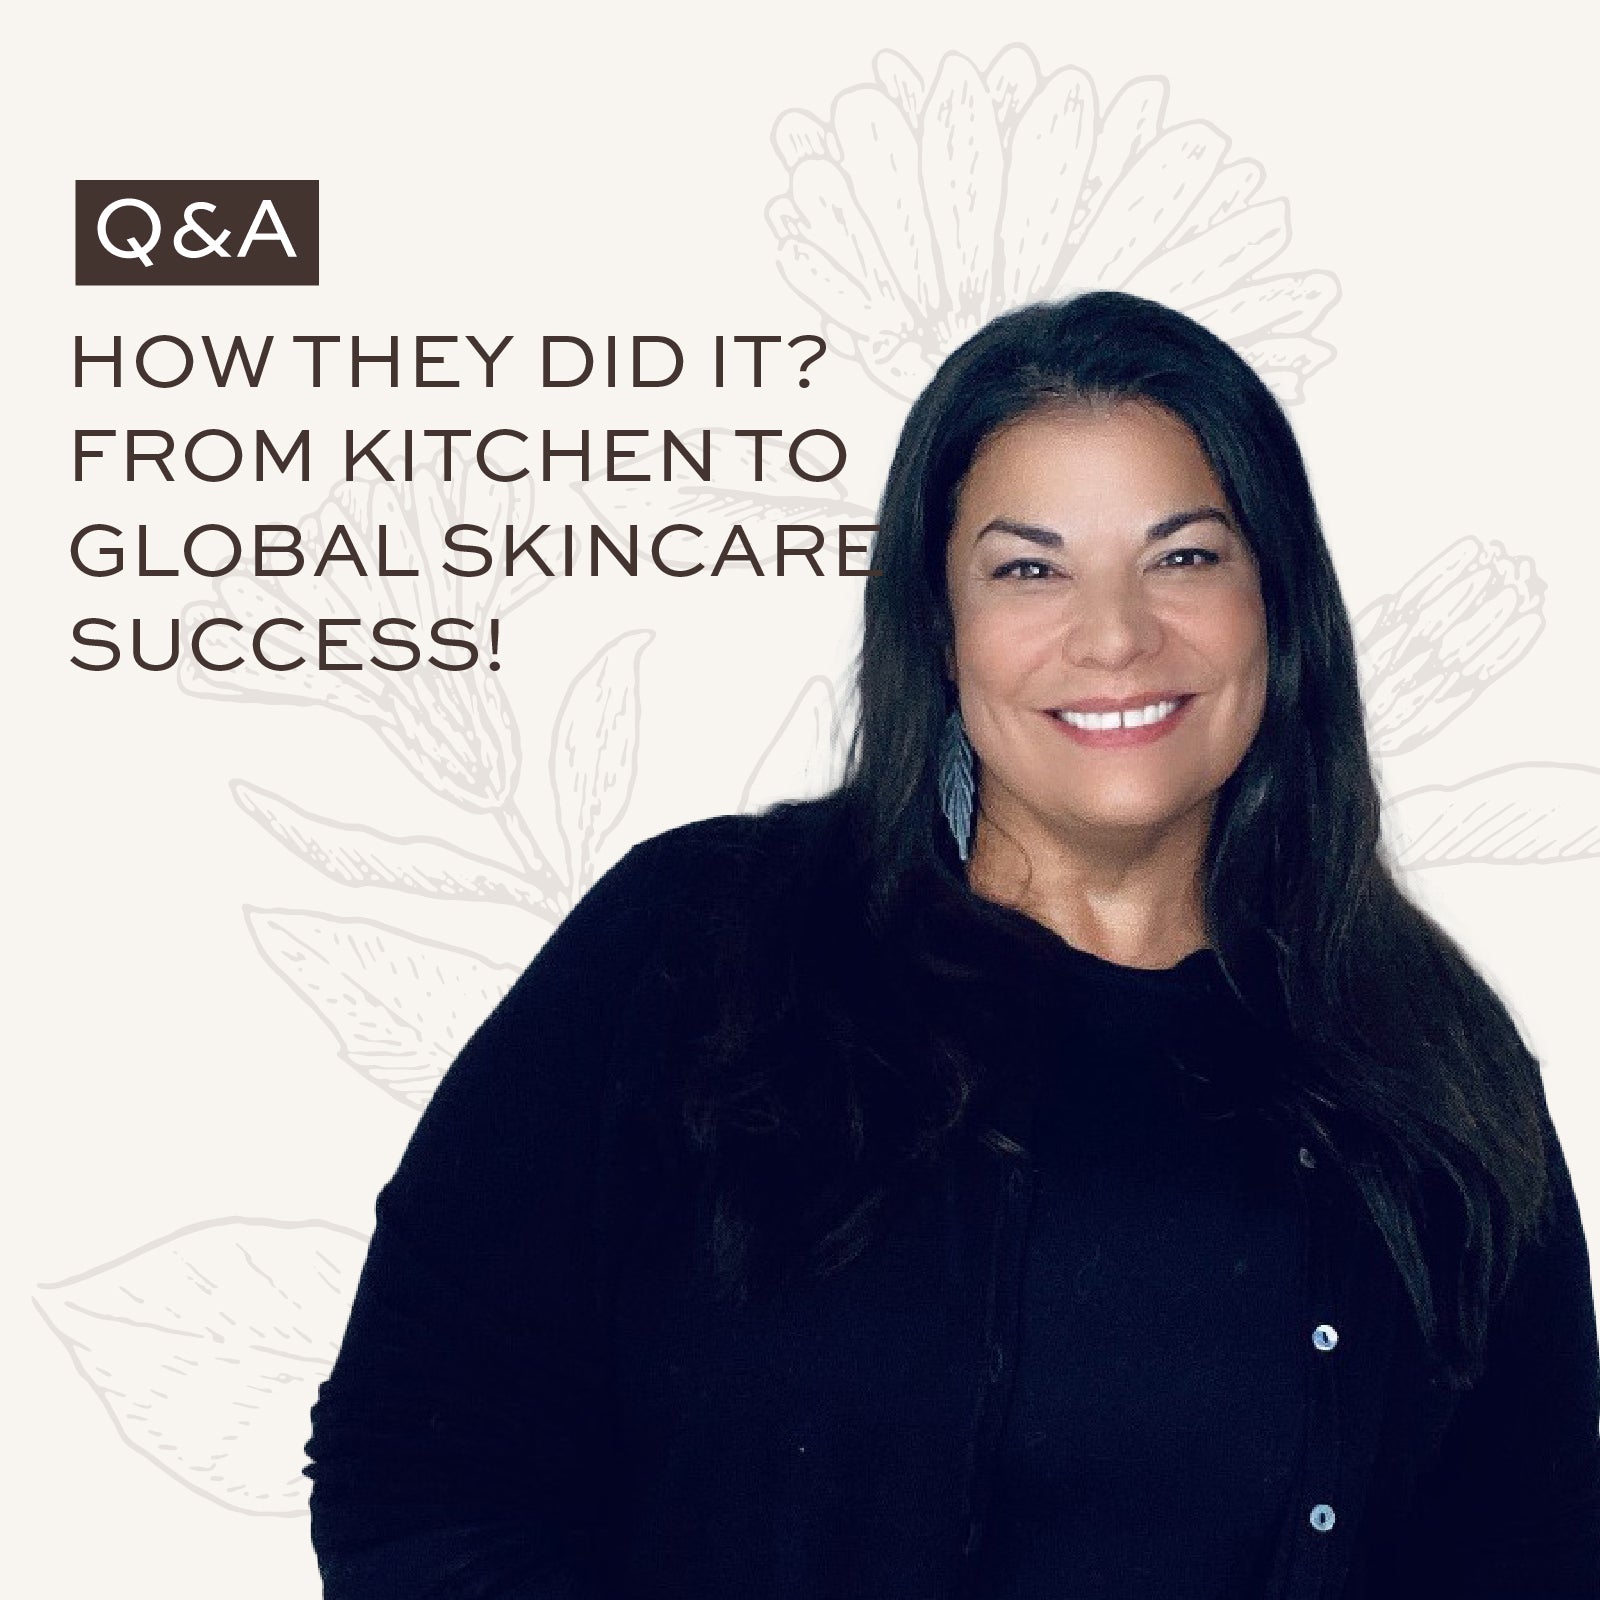 How they did it? From kitchen to global skincare success!